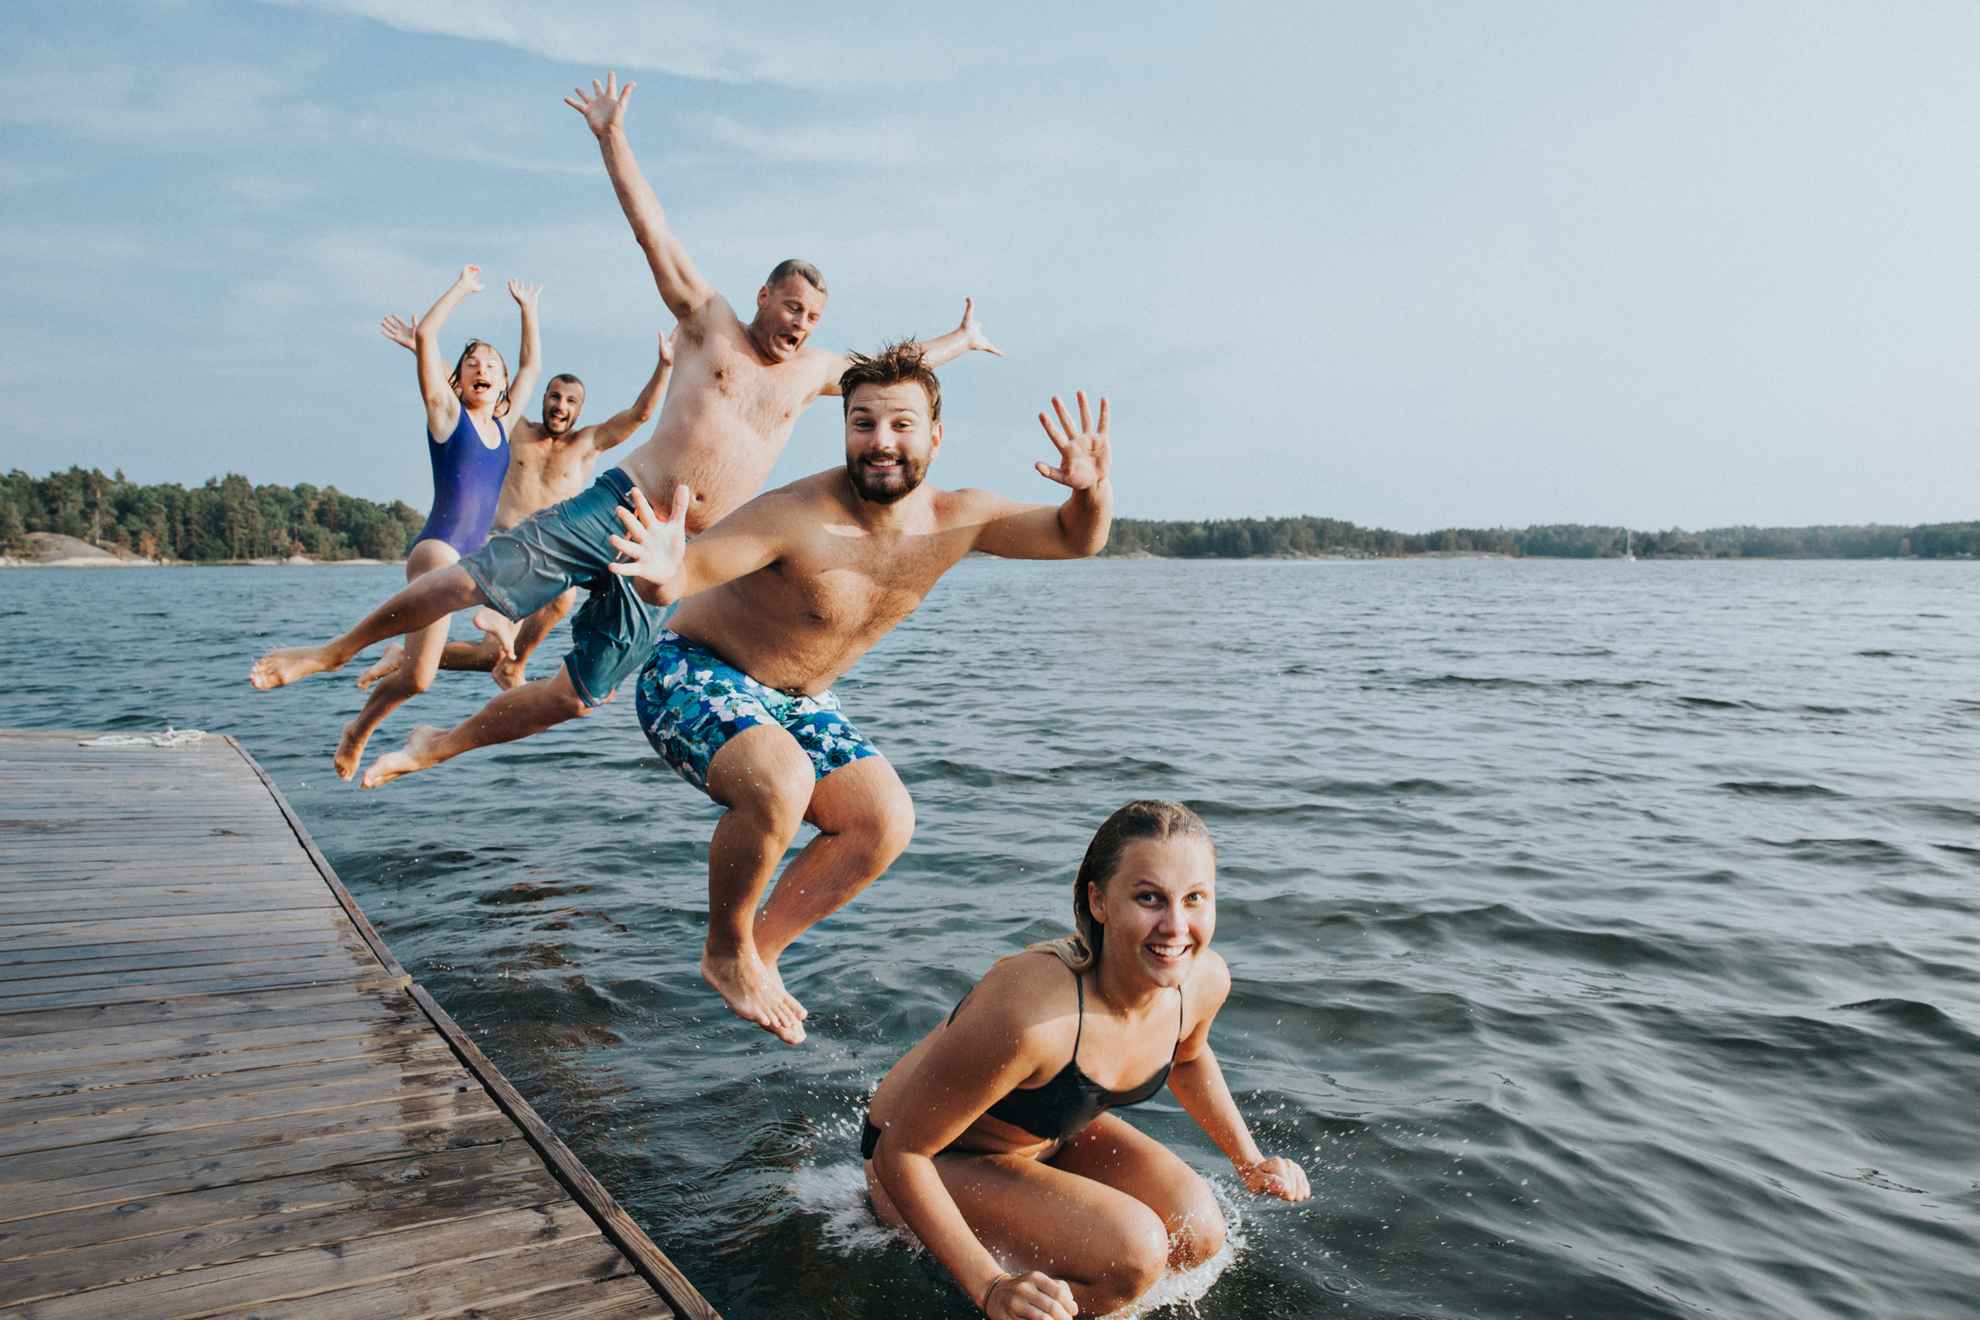 Five young people in swimwear are jumping into a lake from a wooden pier.